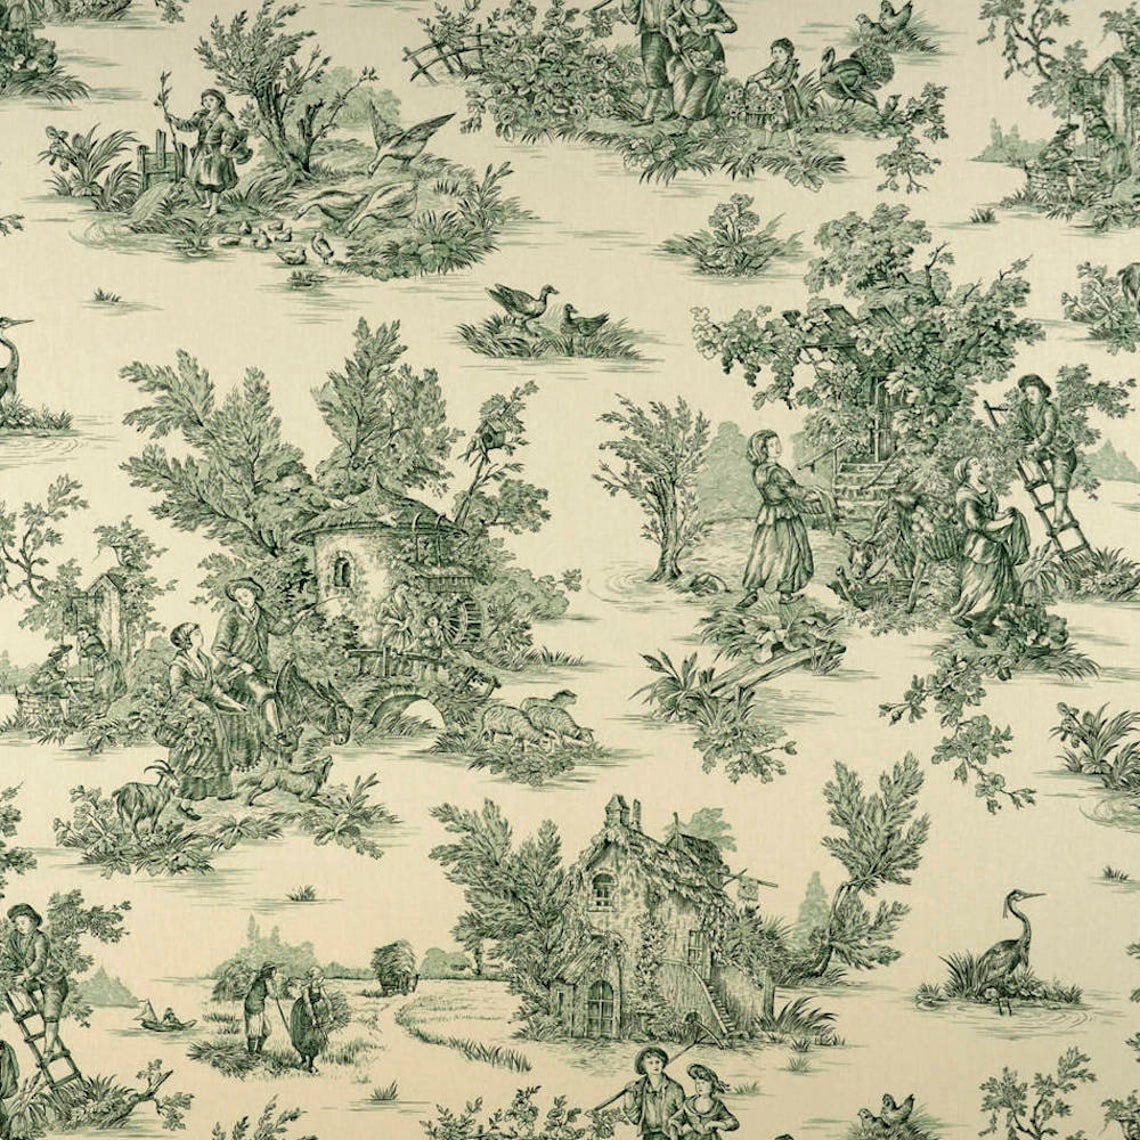 duvet cover in pastorale #3 green on cream french country toile